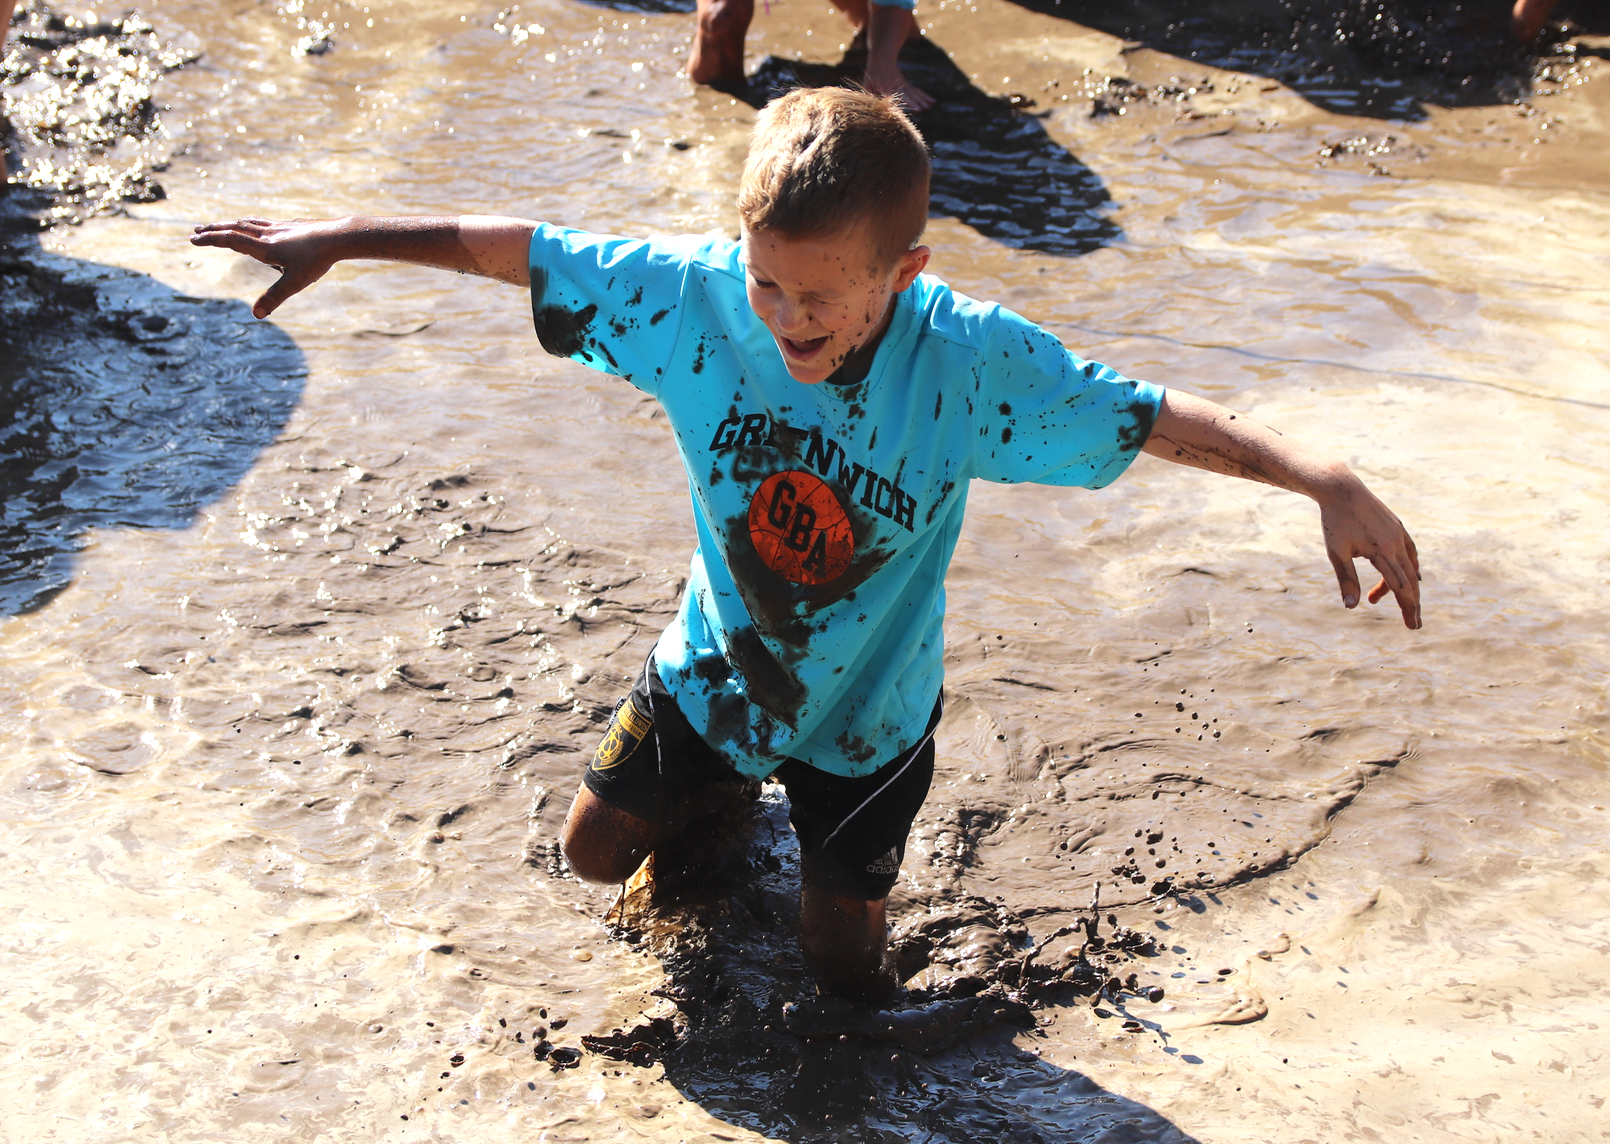 The boys and Girls Club of Greenwich's 8th annual Muddy Up fundraiser at Camp Simmons. Sept 29, 2019 Photo: Leslie Yager